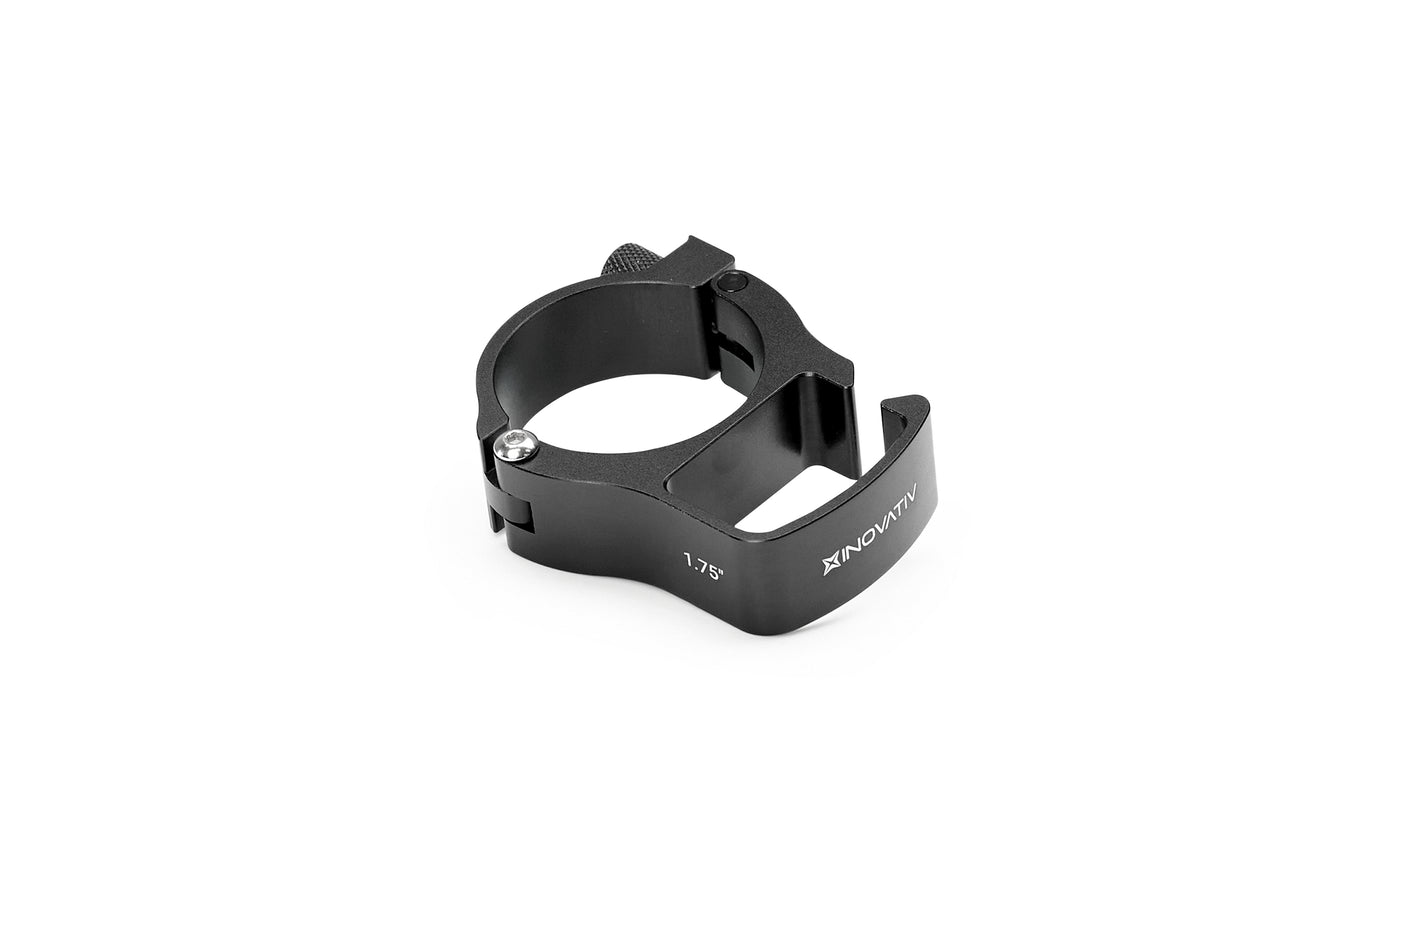 Cable Management Post Clamp – INOVATIV